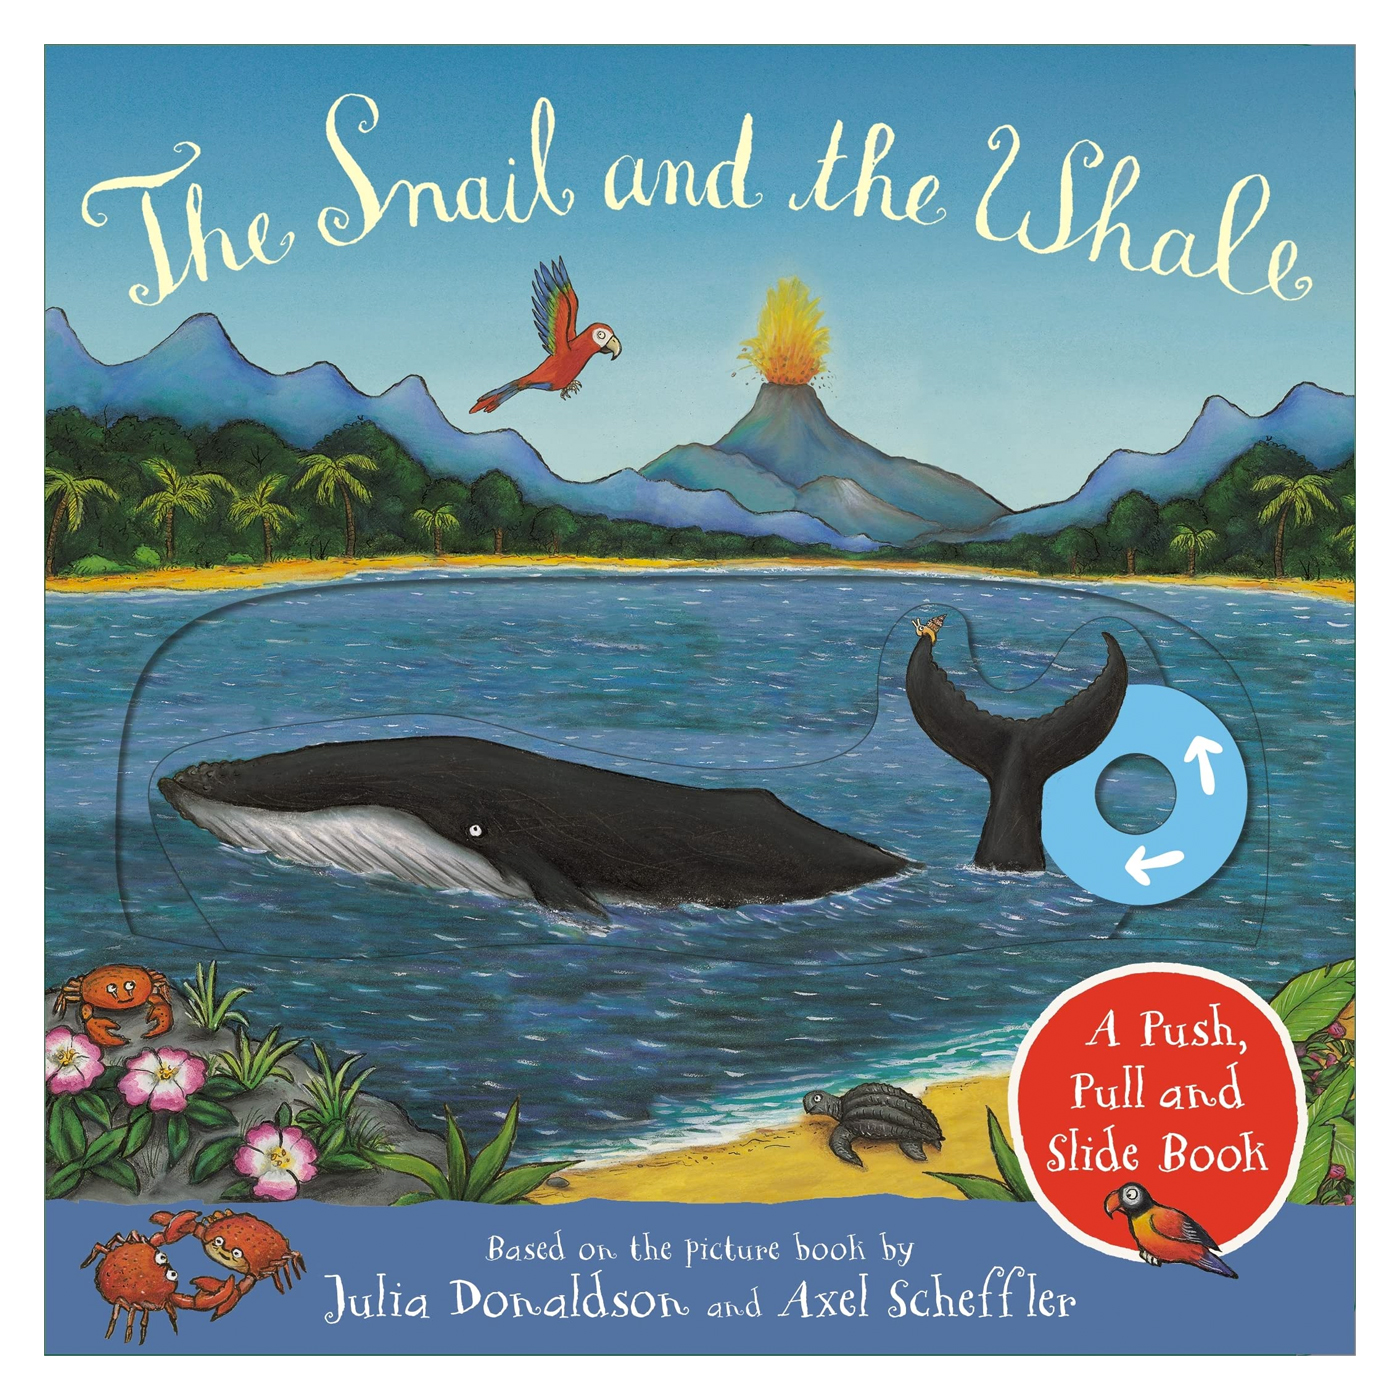  The Snail and the Whale: A Push, Pull and Slide Book